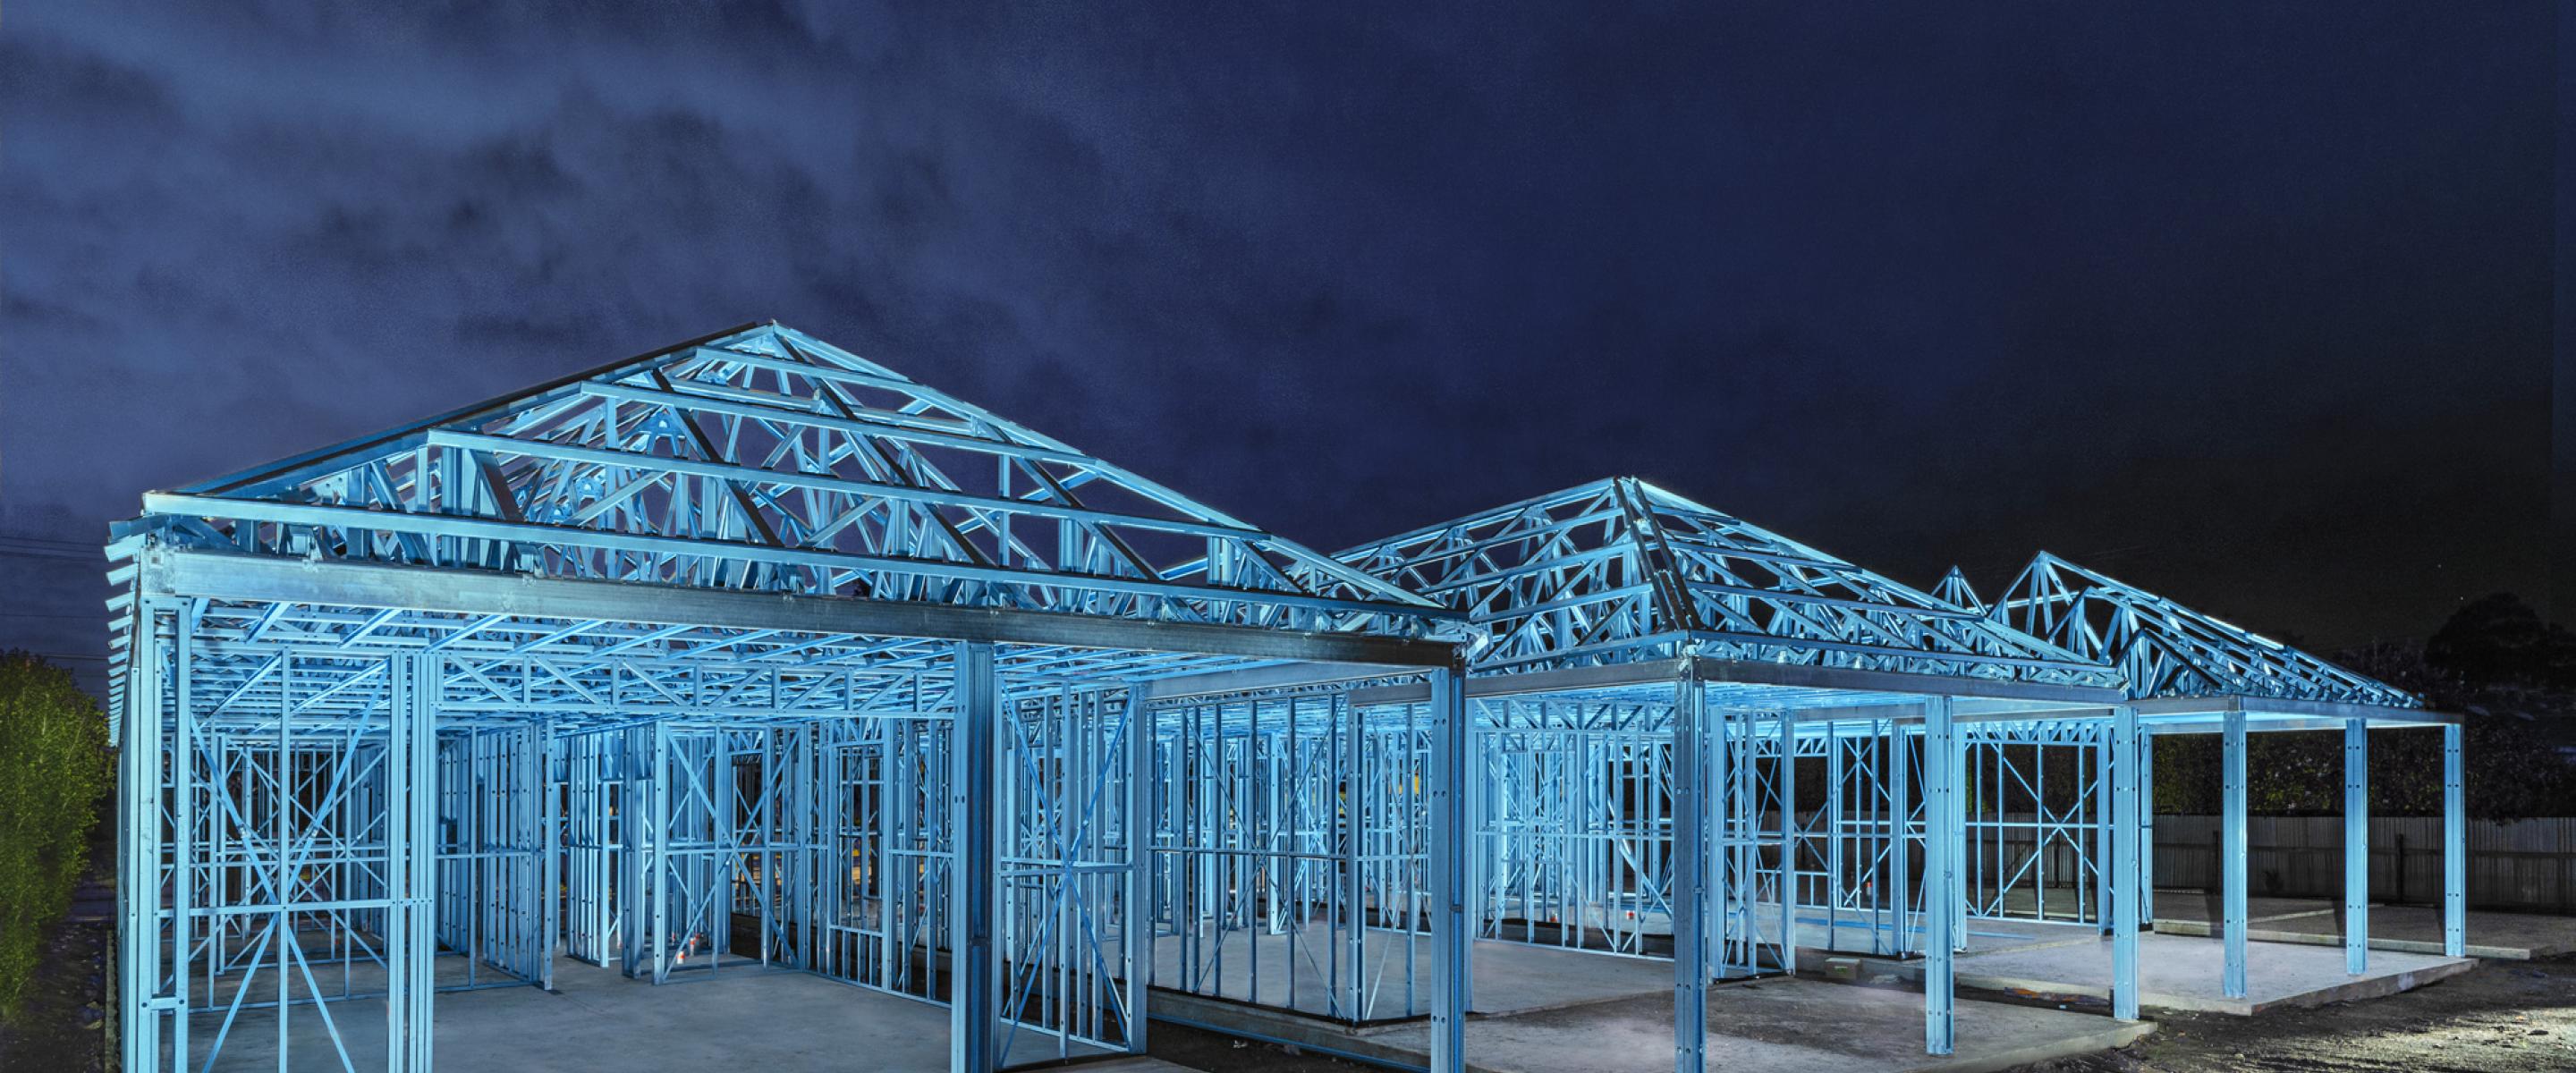 Maxispan steel building frames product range includes wall frames, roof trusses, floor joists and most recently, flooring cassettes, all made from TRUECORE® steel